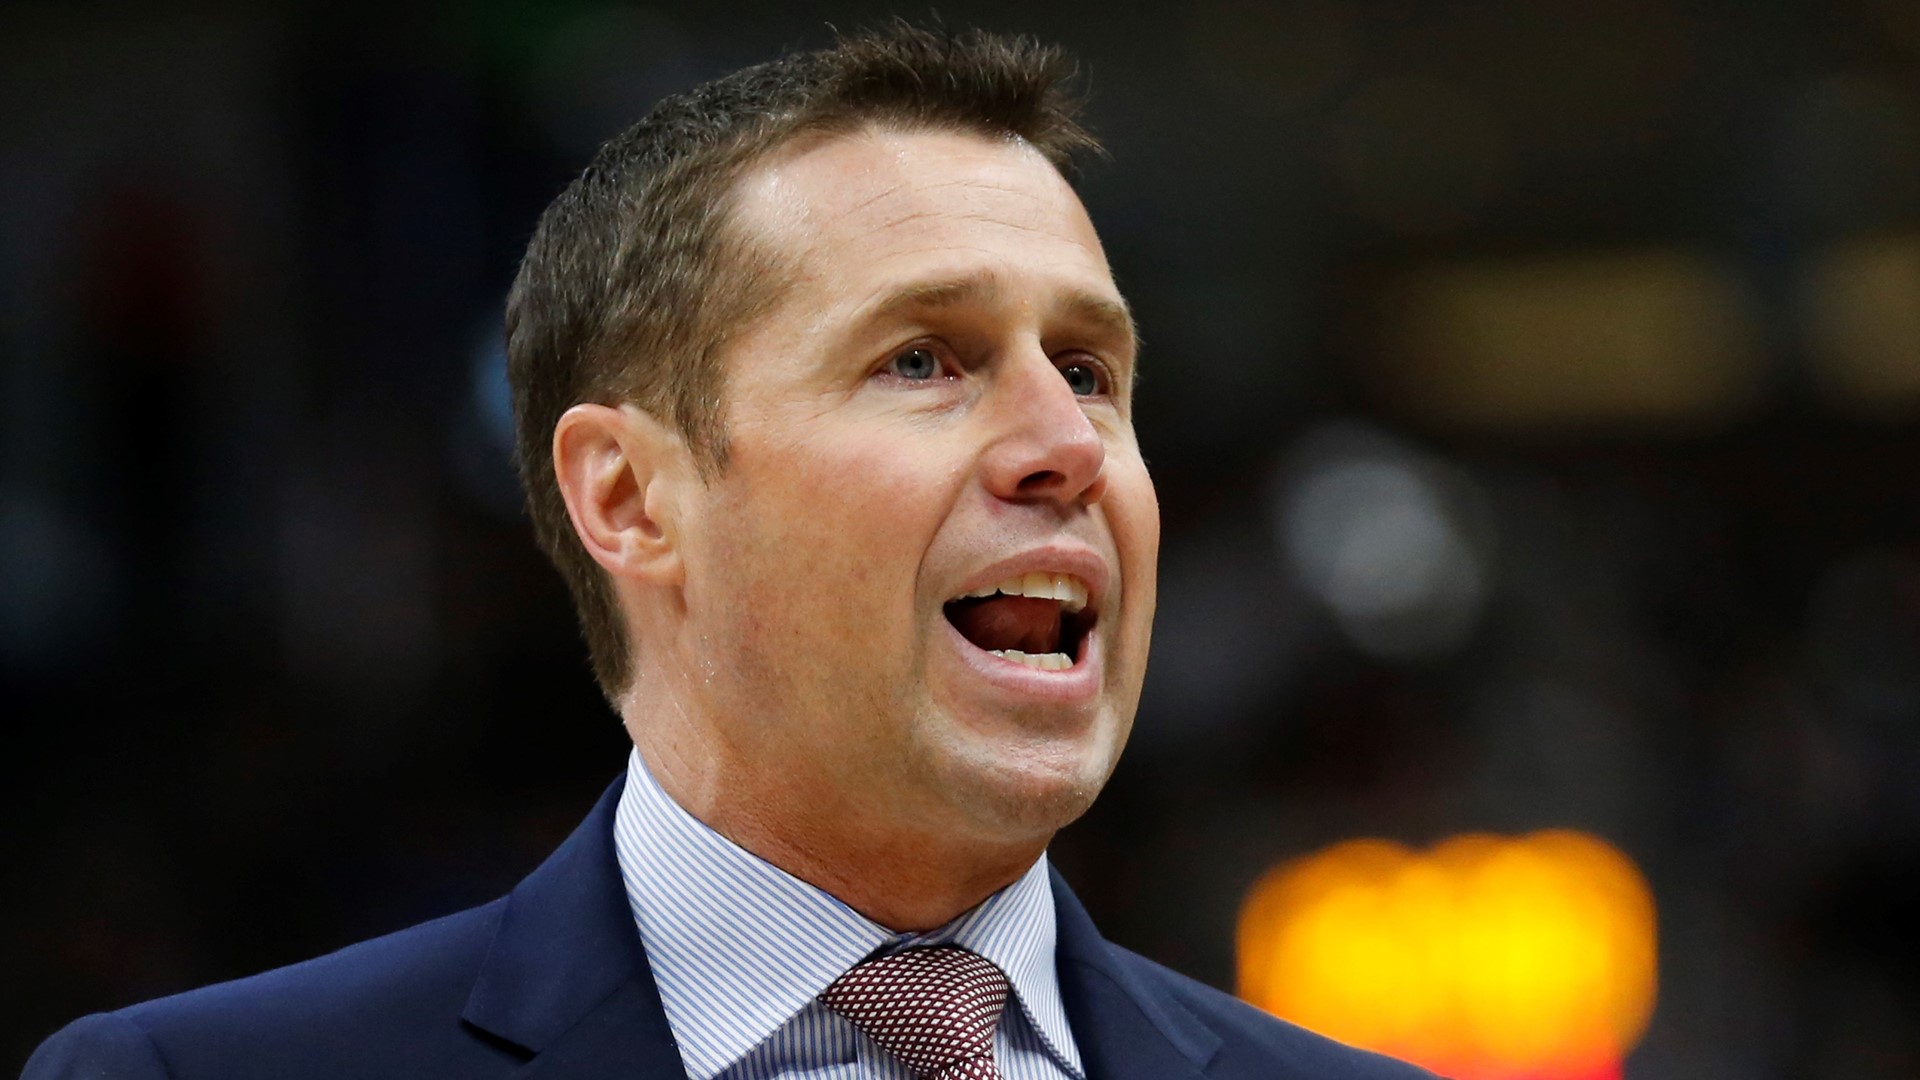 Lina explains all the wheelin' and dealin' taking place within the Sacramento Kings organization, including the firing of coach Dave Joerger.